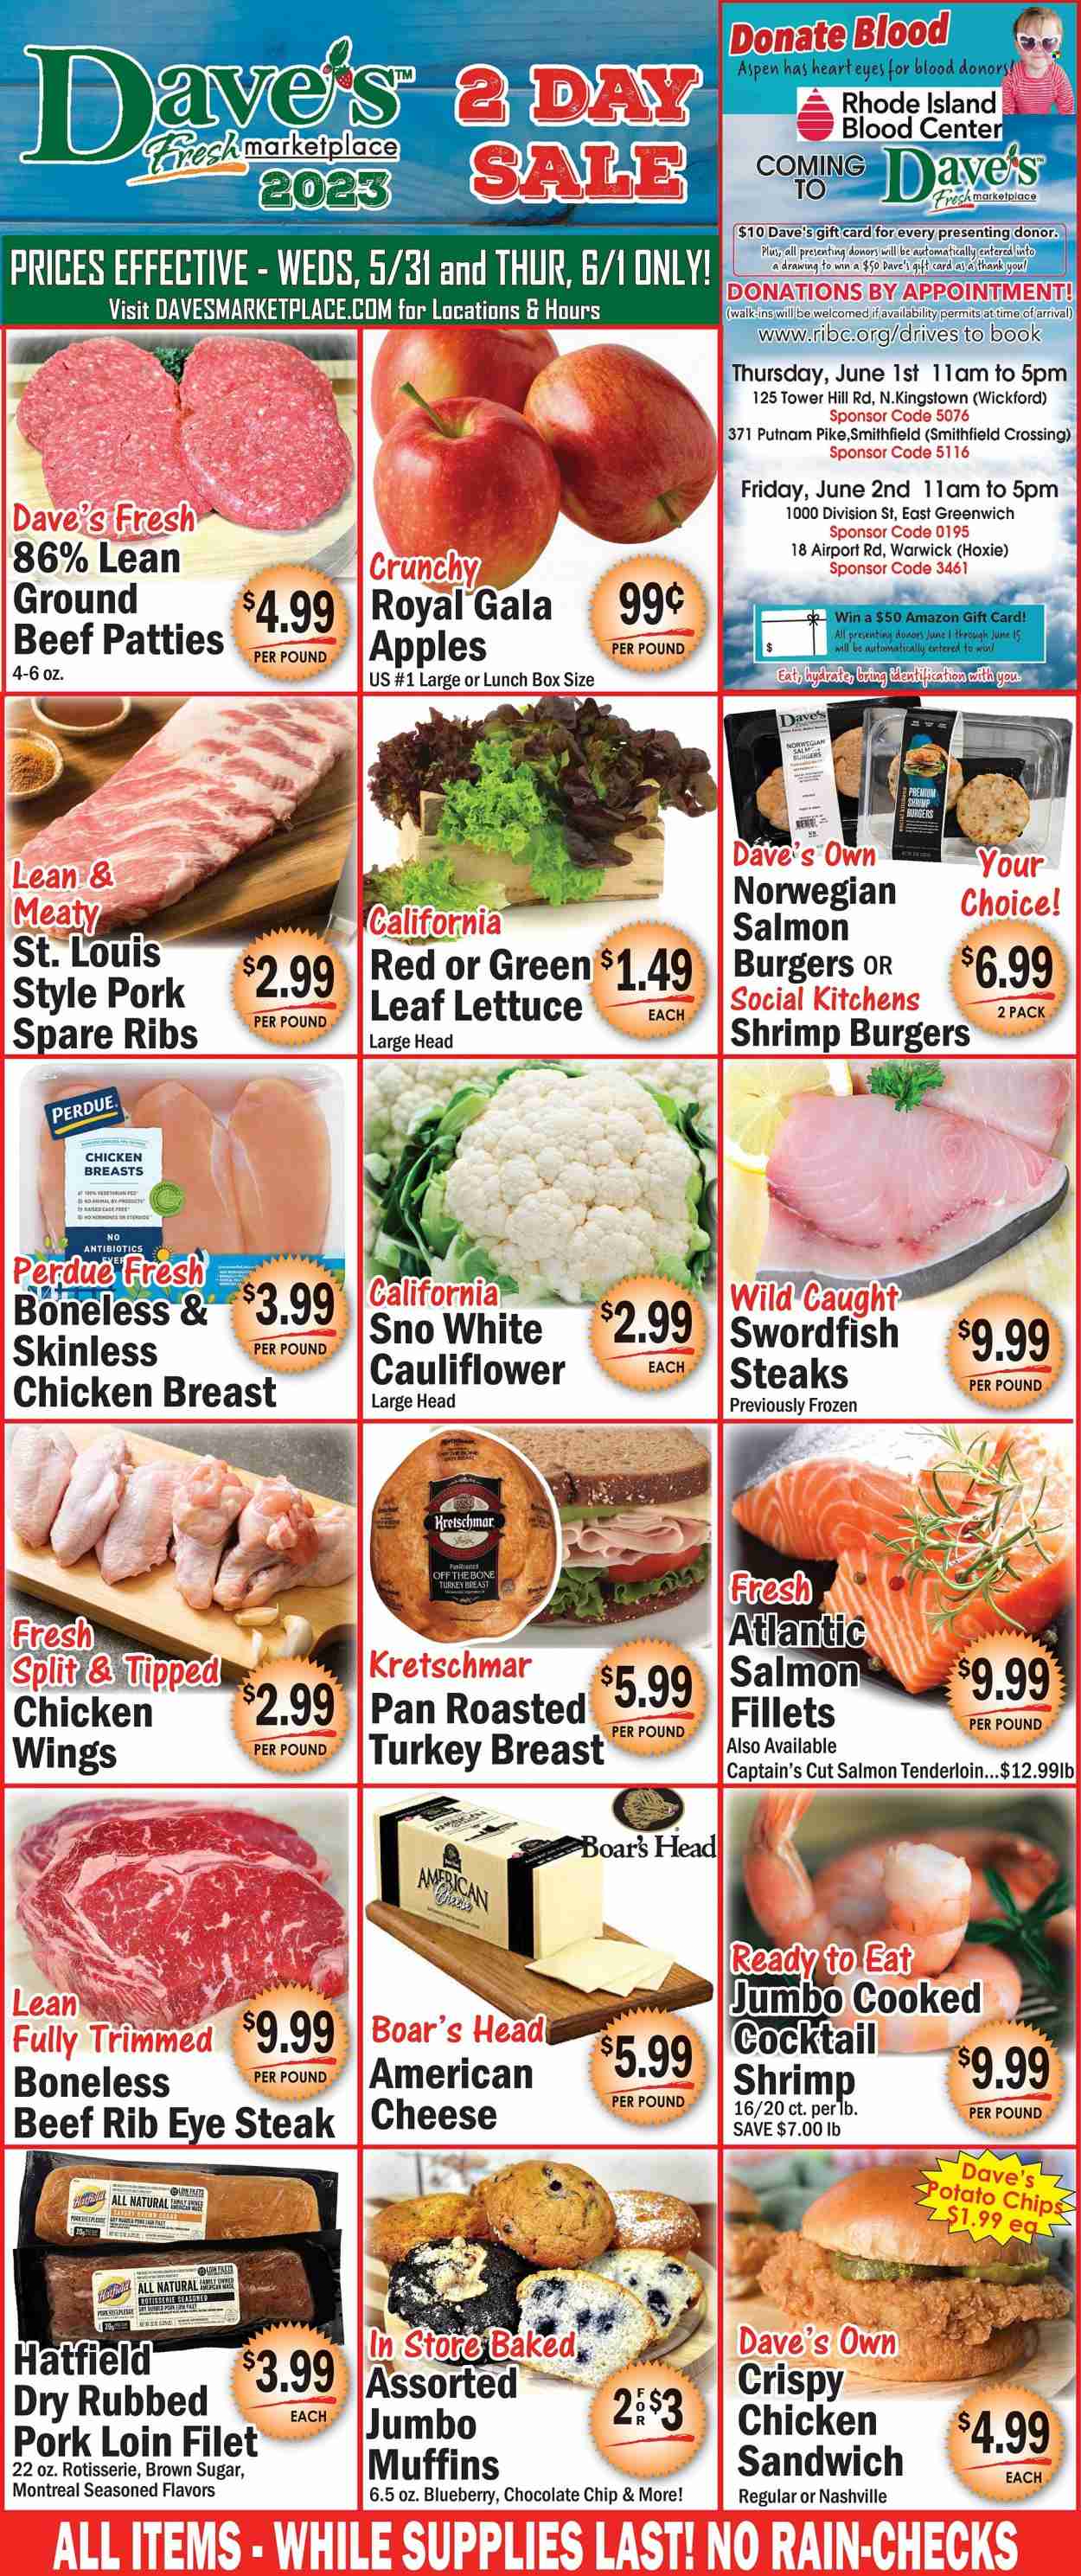 thumbnail - Dave's Fresh Marketplace Flyer - 05/31/2023 - 06/01/2023 - Sales products - muffin, lettuce, apples, Gala, salmon fillet, swordfish, shrimps, sandwich, hamburger, Perdue®, Boar's Head, ham, cage free eggs, chocolate chips, potato chips, cane sugar, chicken breasts, chicken, beef meat, ground beef, steak, ribeye steak, ribs, fish burger, pork loin, pork meat, pork ribs, pork spare ribs, pin. Page 1.